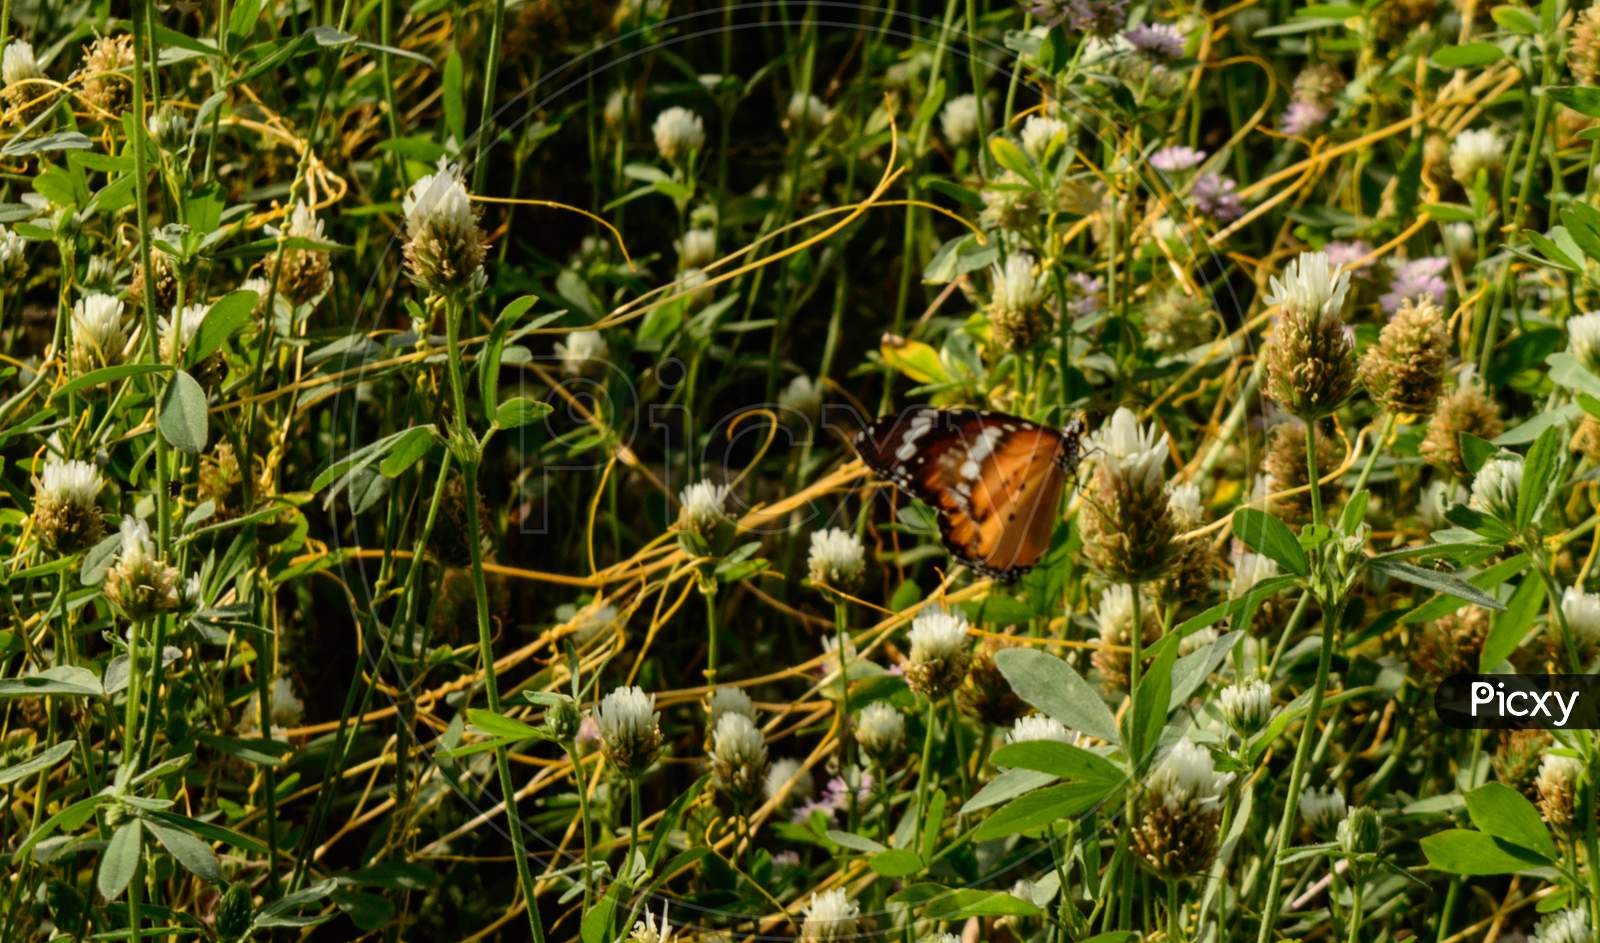 One Indian Butterfly Trying To Relax On Beautiful Indian Flowers Field Coverup With Spider Web.